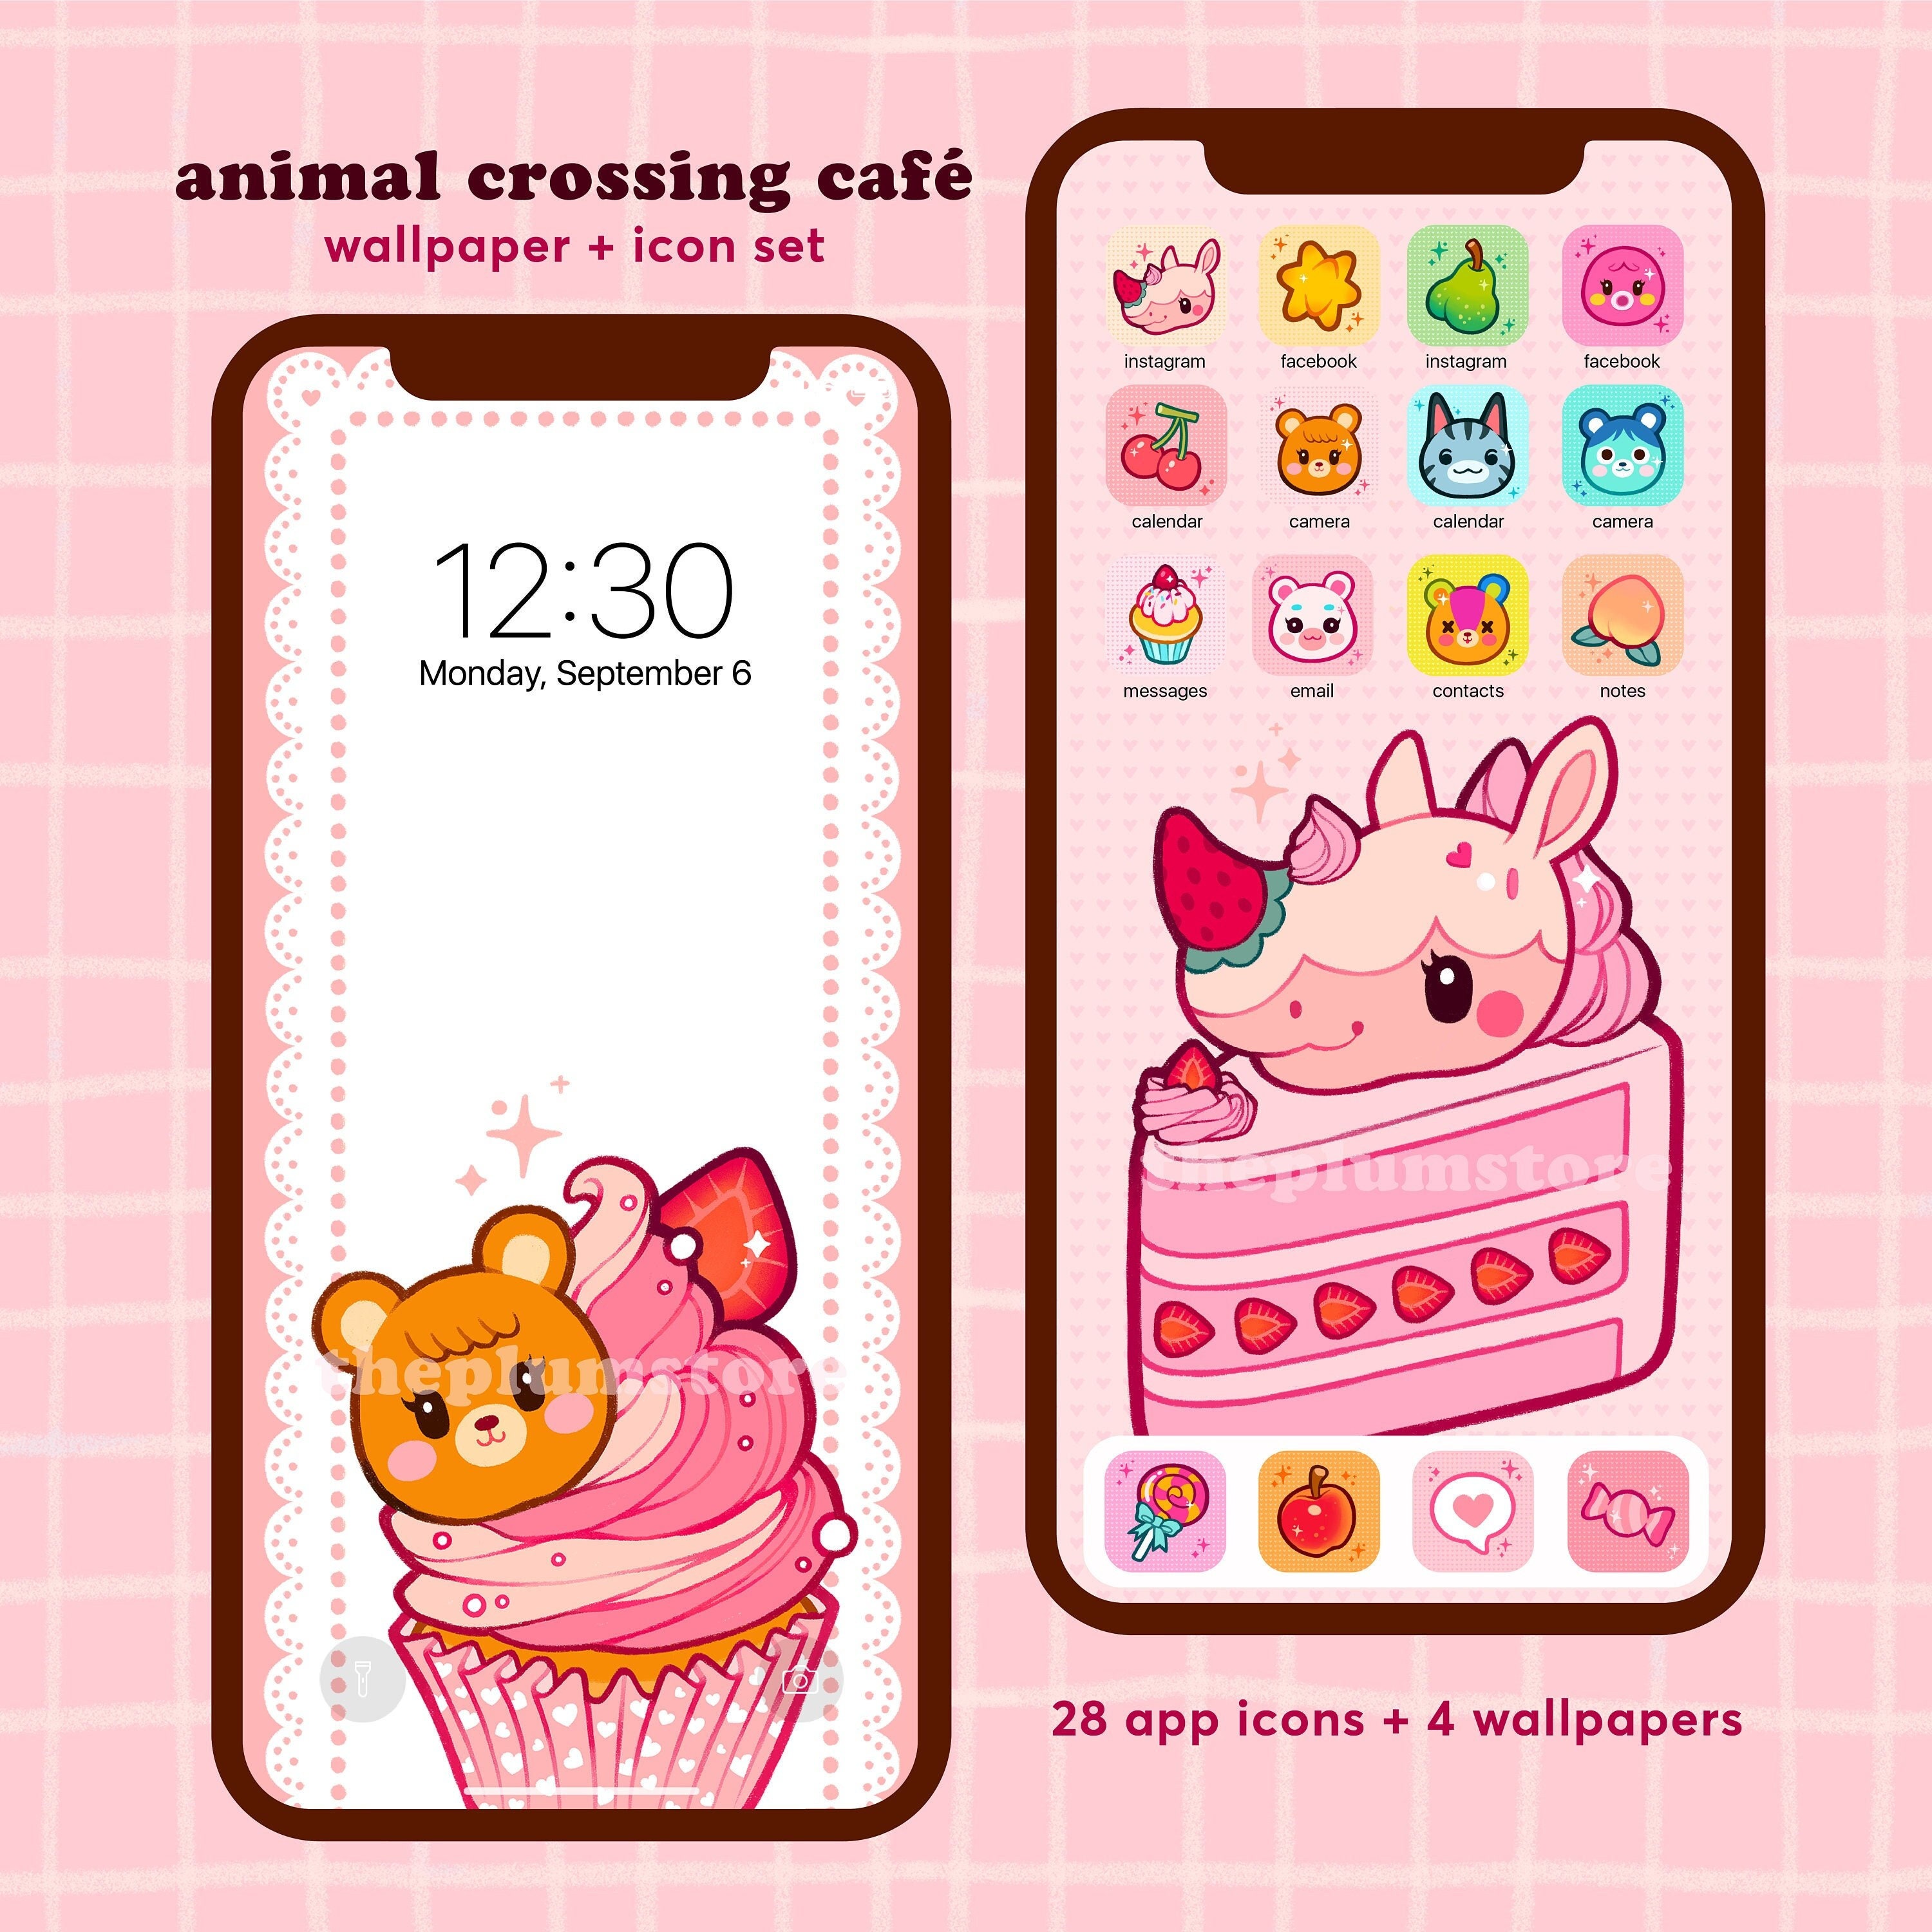 Animal crossing wallpaper by Eatentoast  Download on ZEDGE  e099